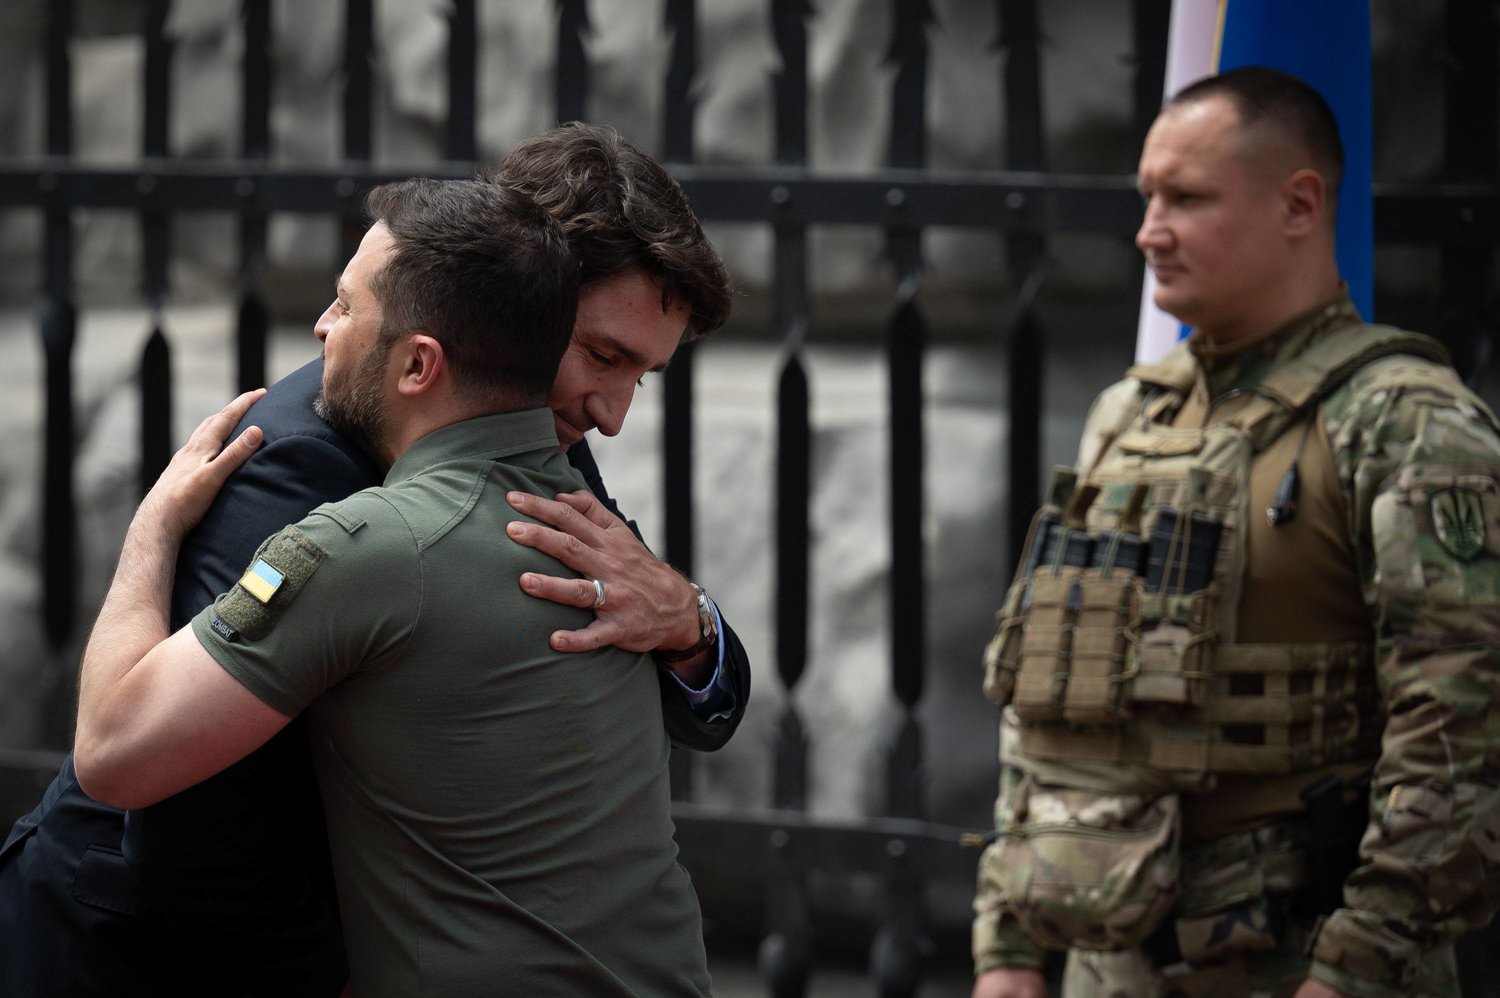 A handout photo made available by Ukraine's Presidential Press Service shows Ukraine's President Volodymyr Zelensky (L, front) welcoming Canada's Prime Minister Justin Trudeau (L, back) to Kyiv, Ukraine, 10 June 2023, amid Russia's invasion.  EPA/PRESIDENTIAL PRESS SERVICE 